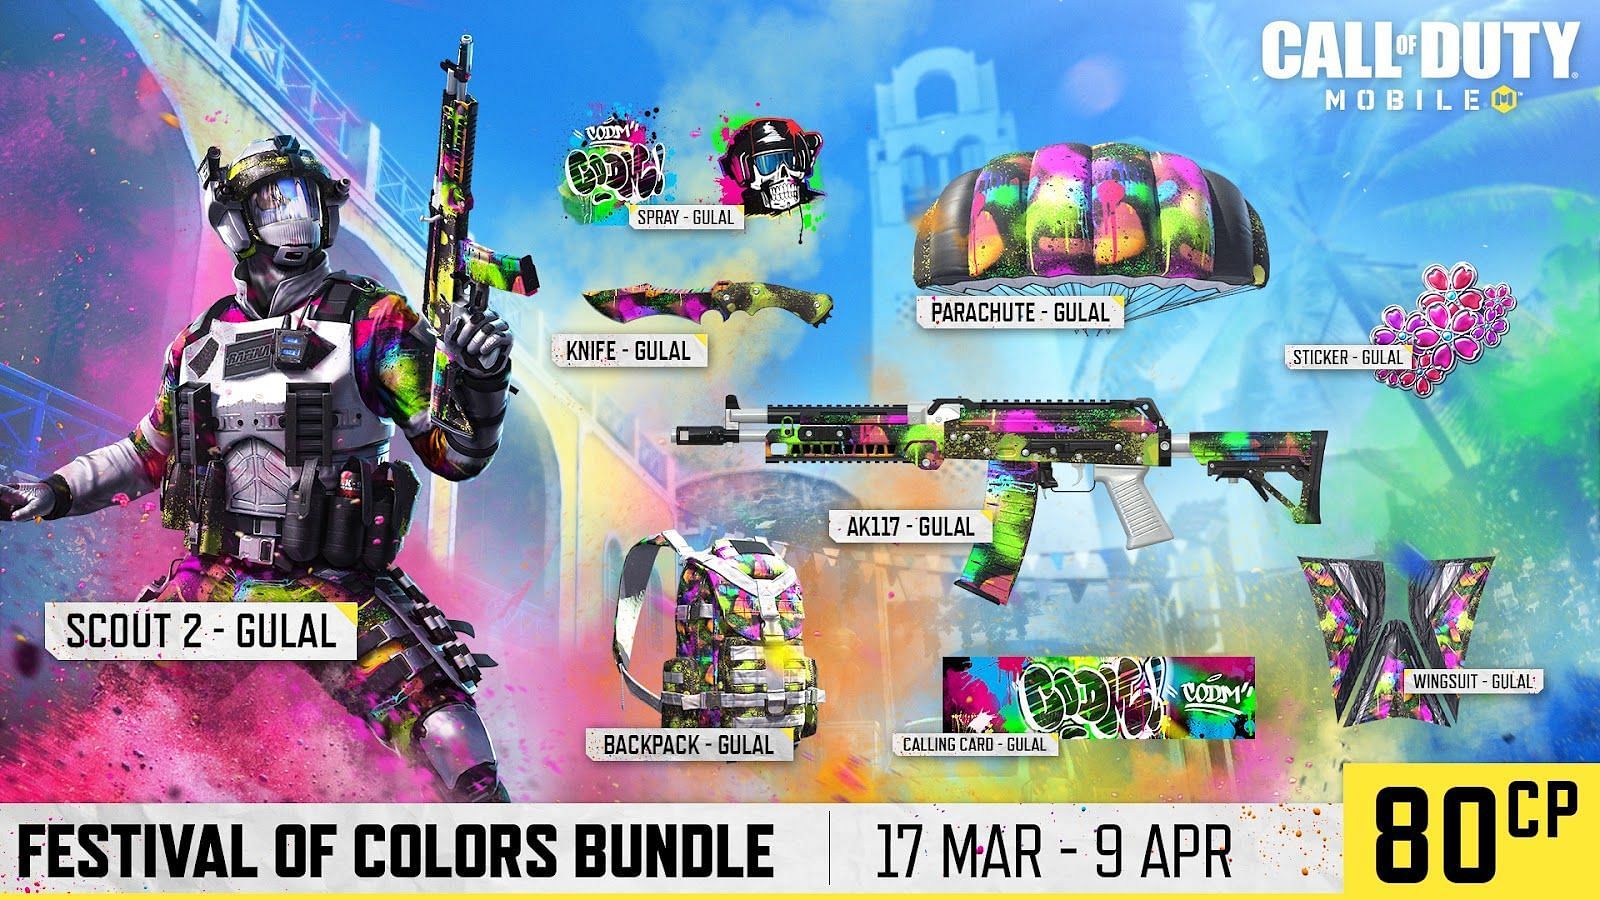 All items in the Festival of Colors bundle in the game during the upcoming Holi celebrations (Image via Activision)